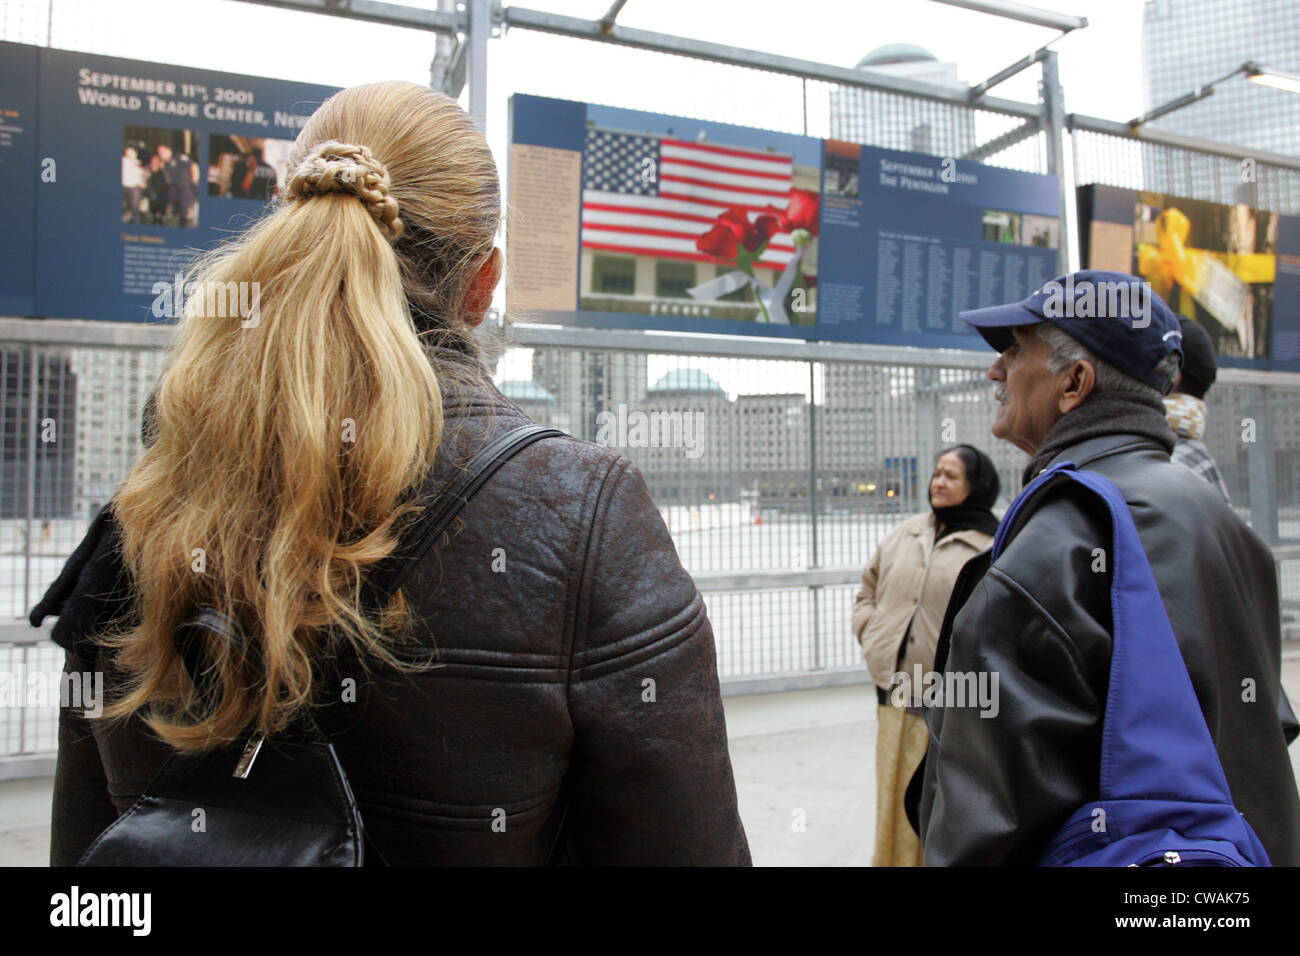 New York, people inform themselves about the events at Ground Zero Stock Photo